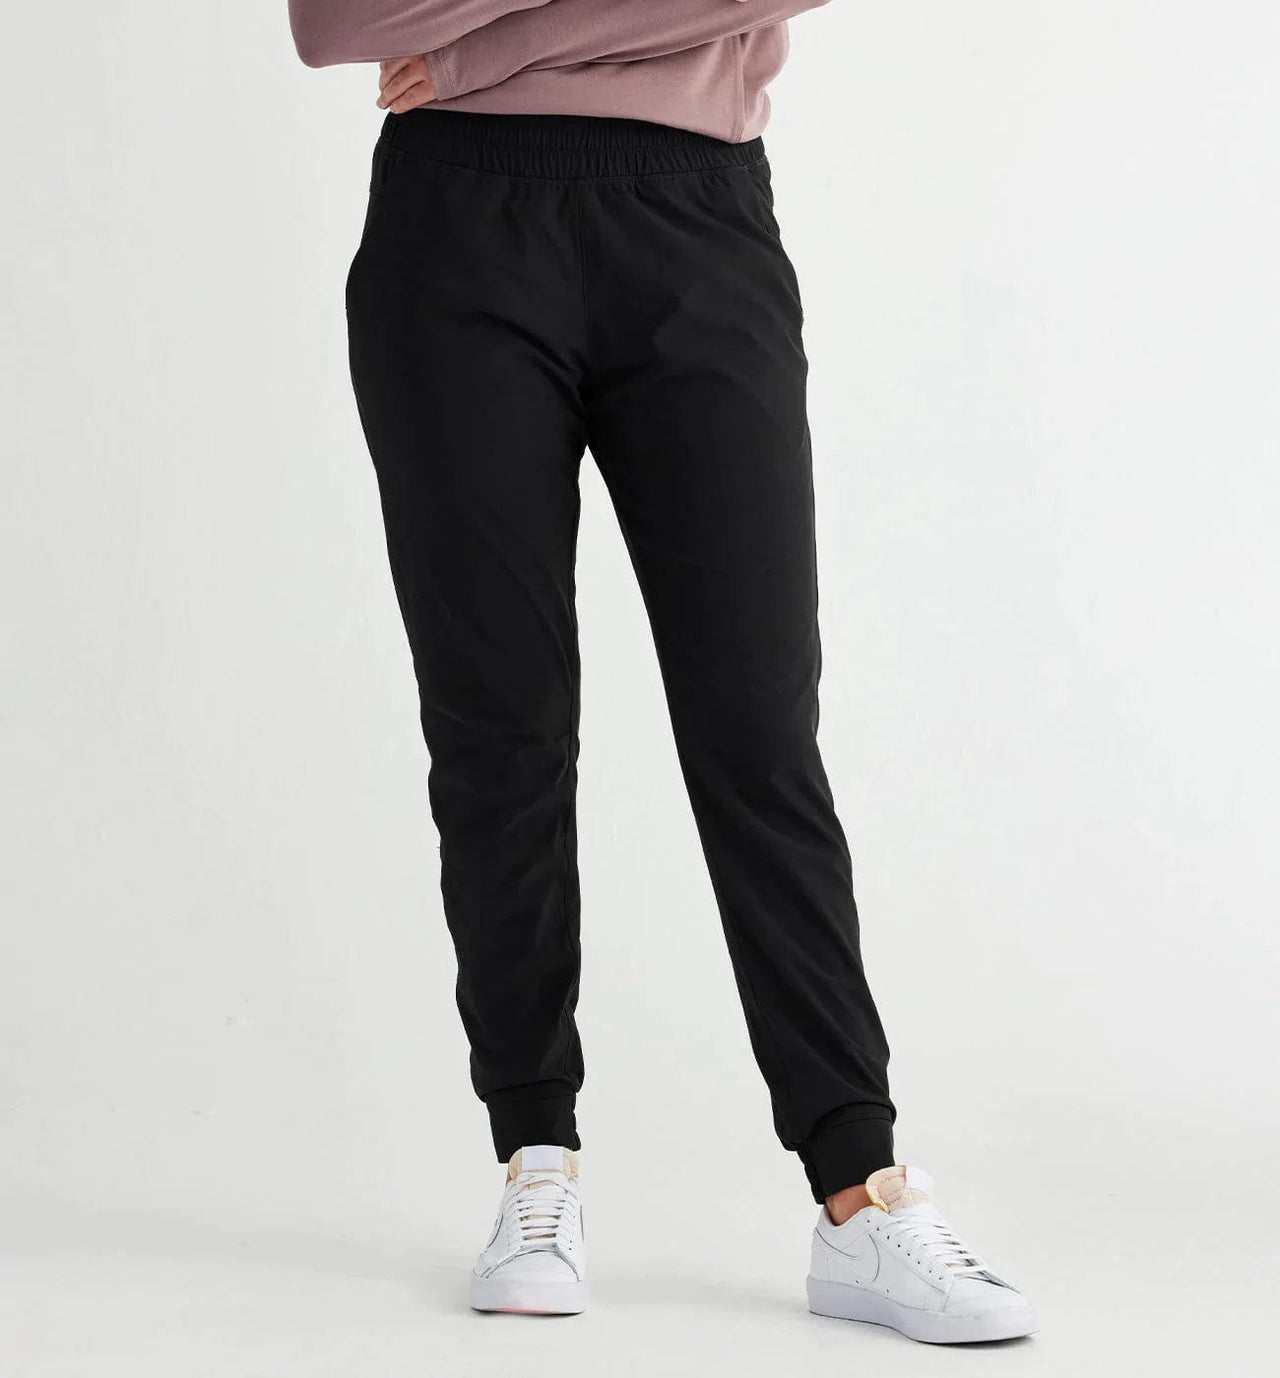 Free Fly Apparel Joggers Black / XS Women's Pull-On Breeze Jogger